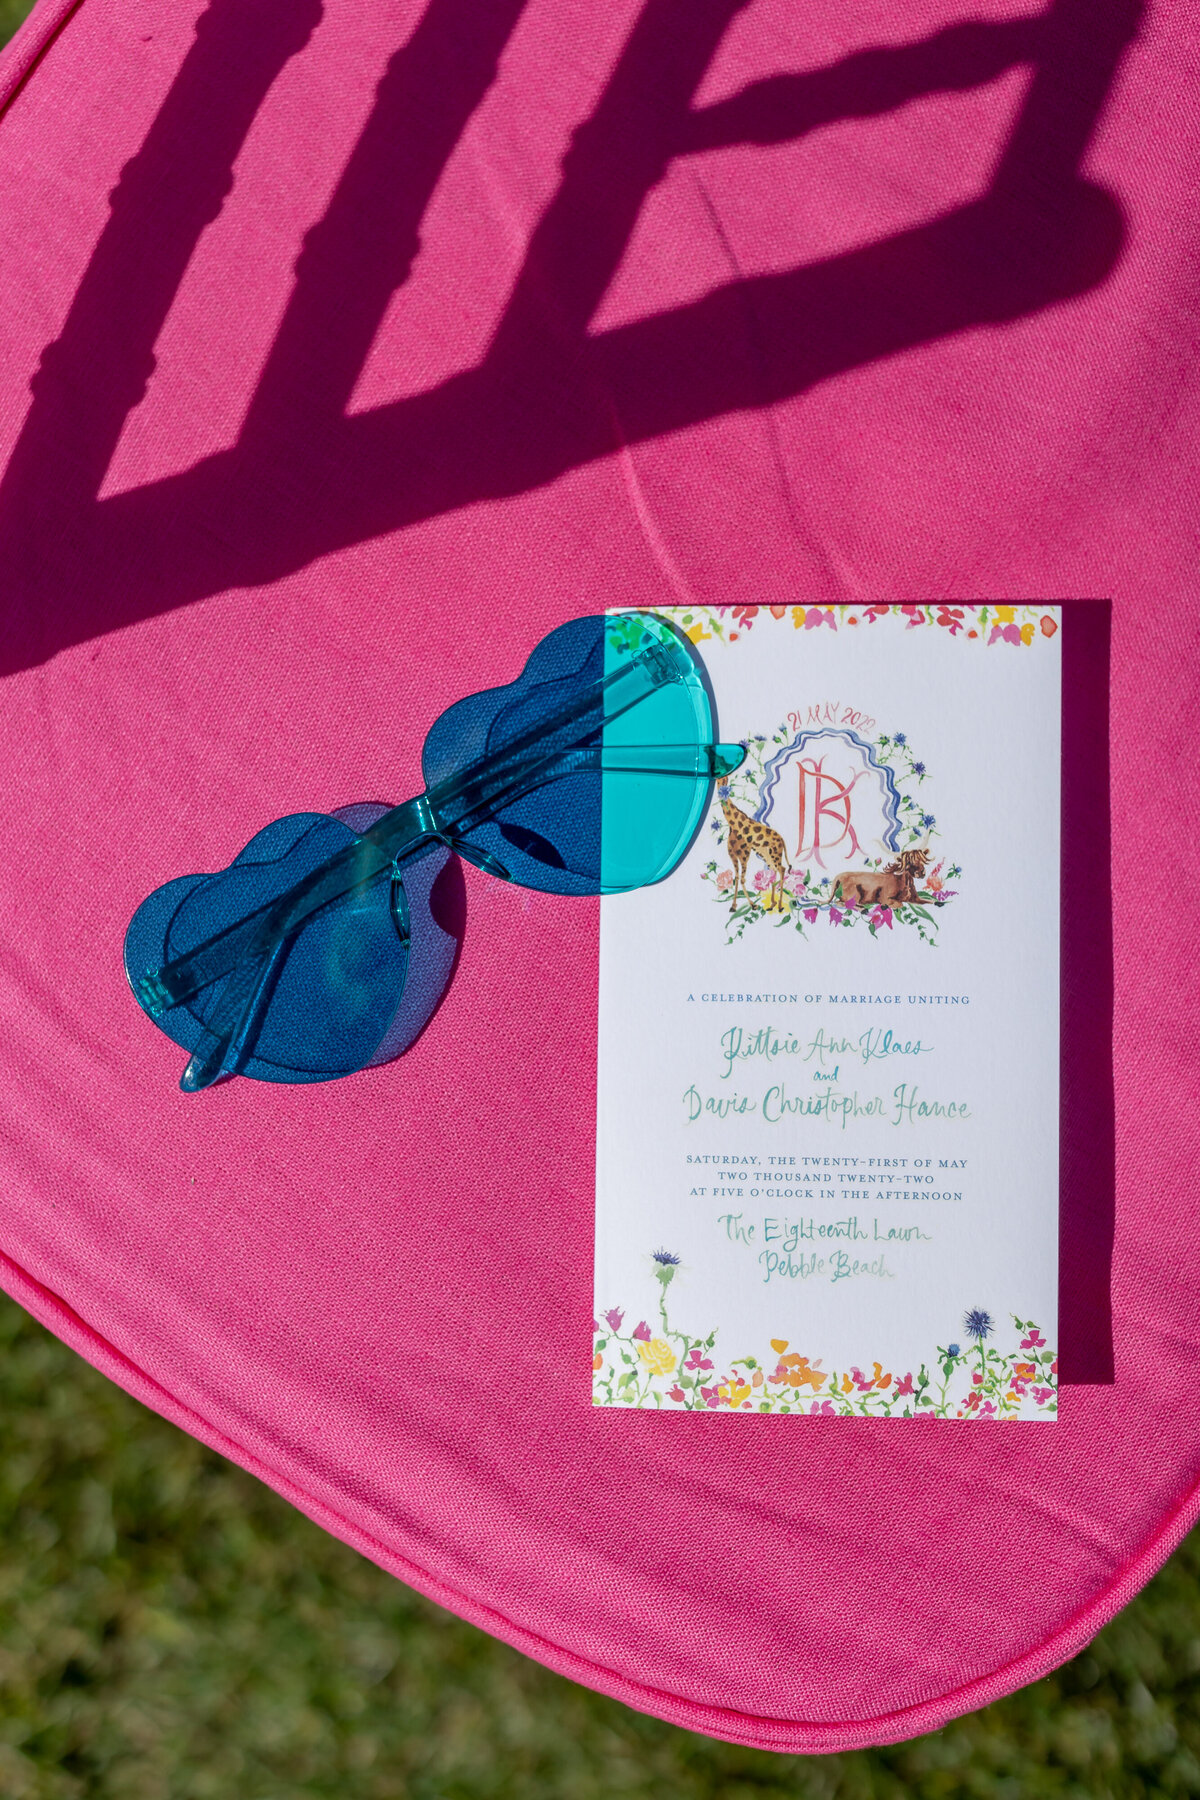 Colorful sunglasses and program at a Pebble Beach wedding